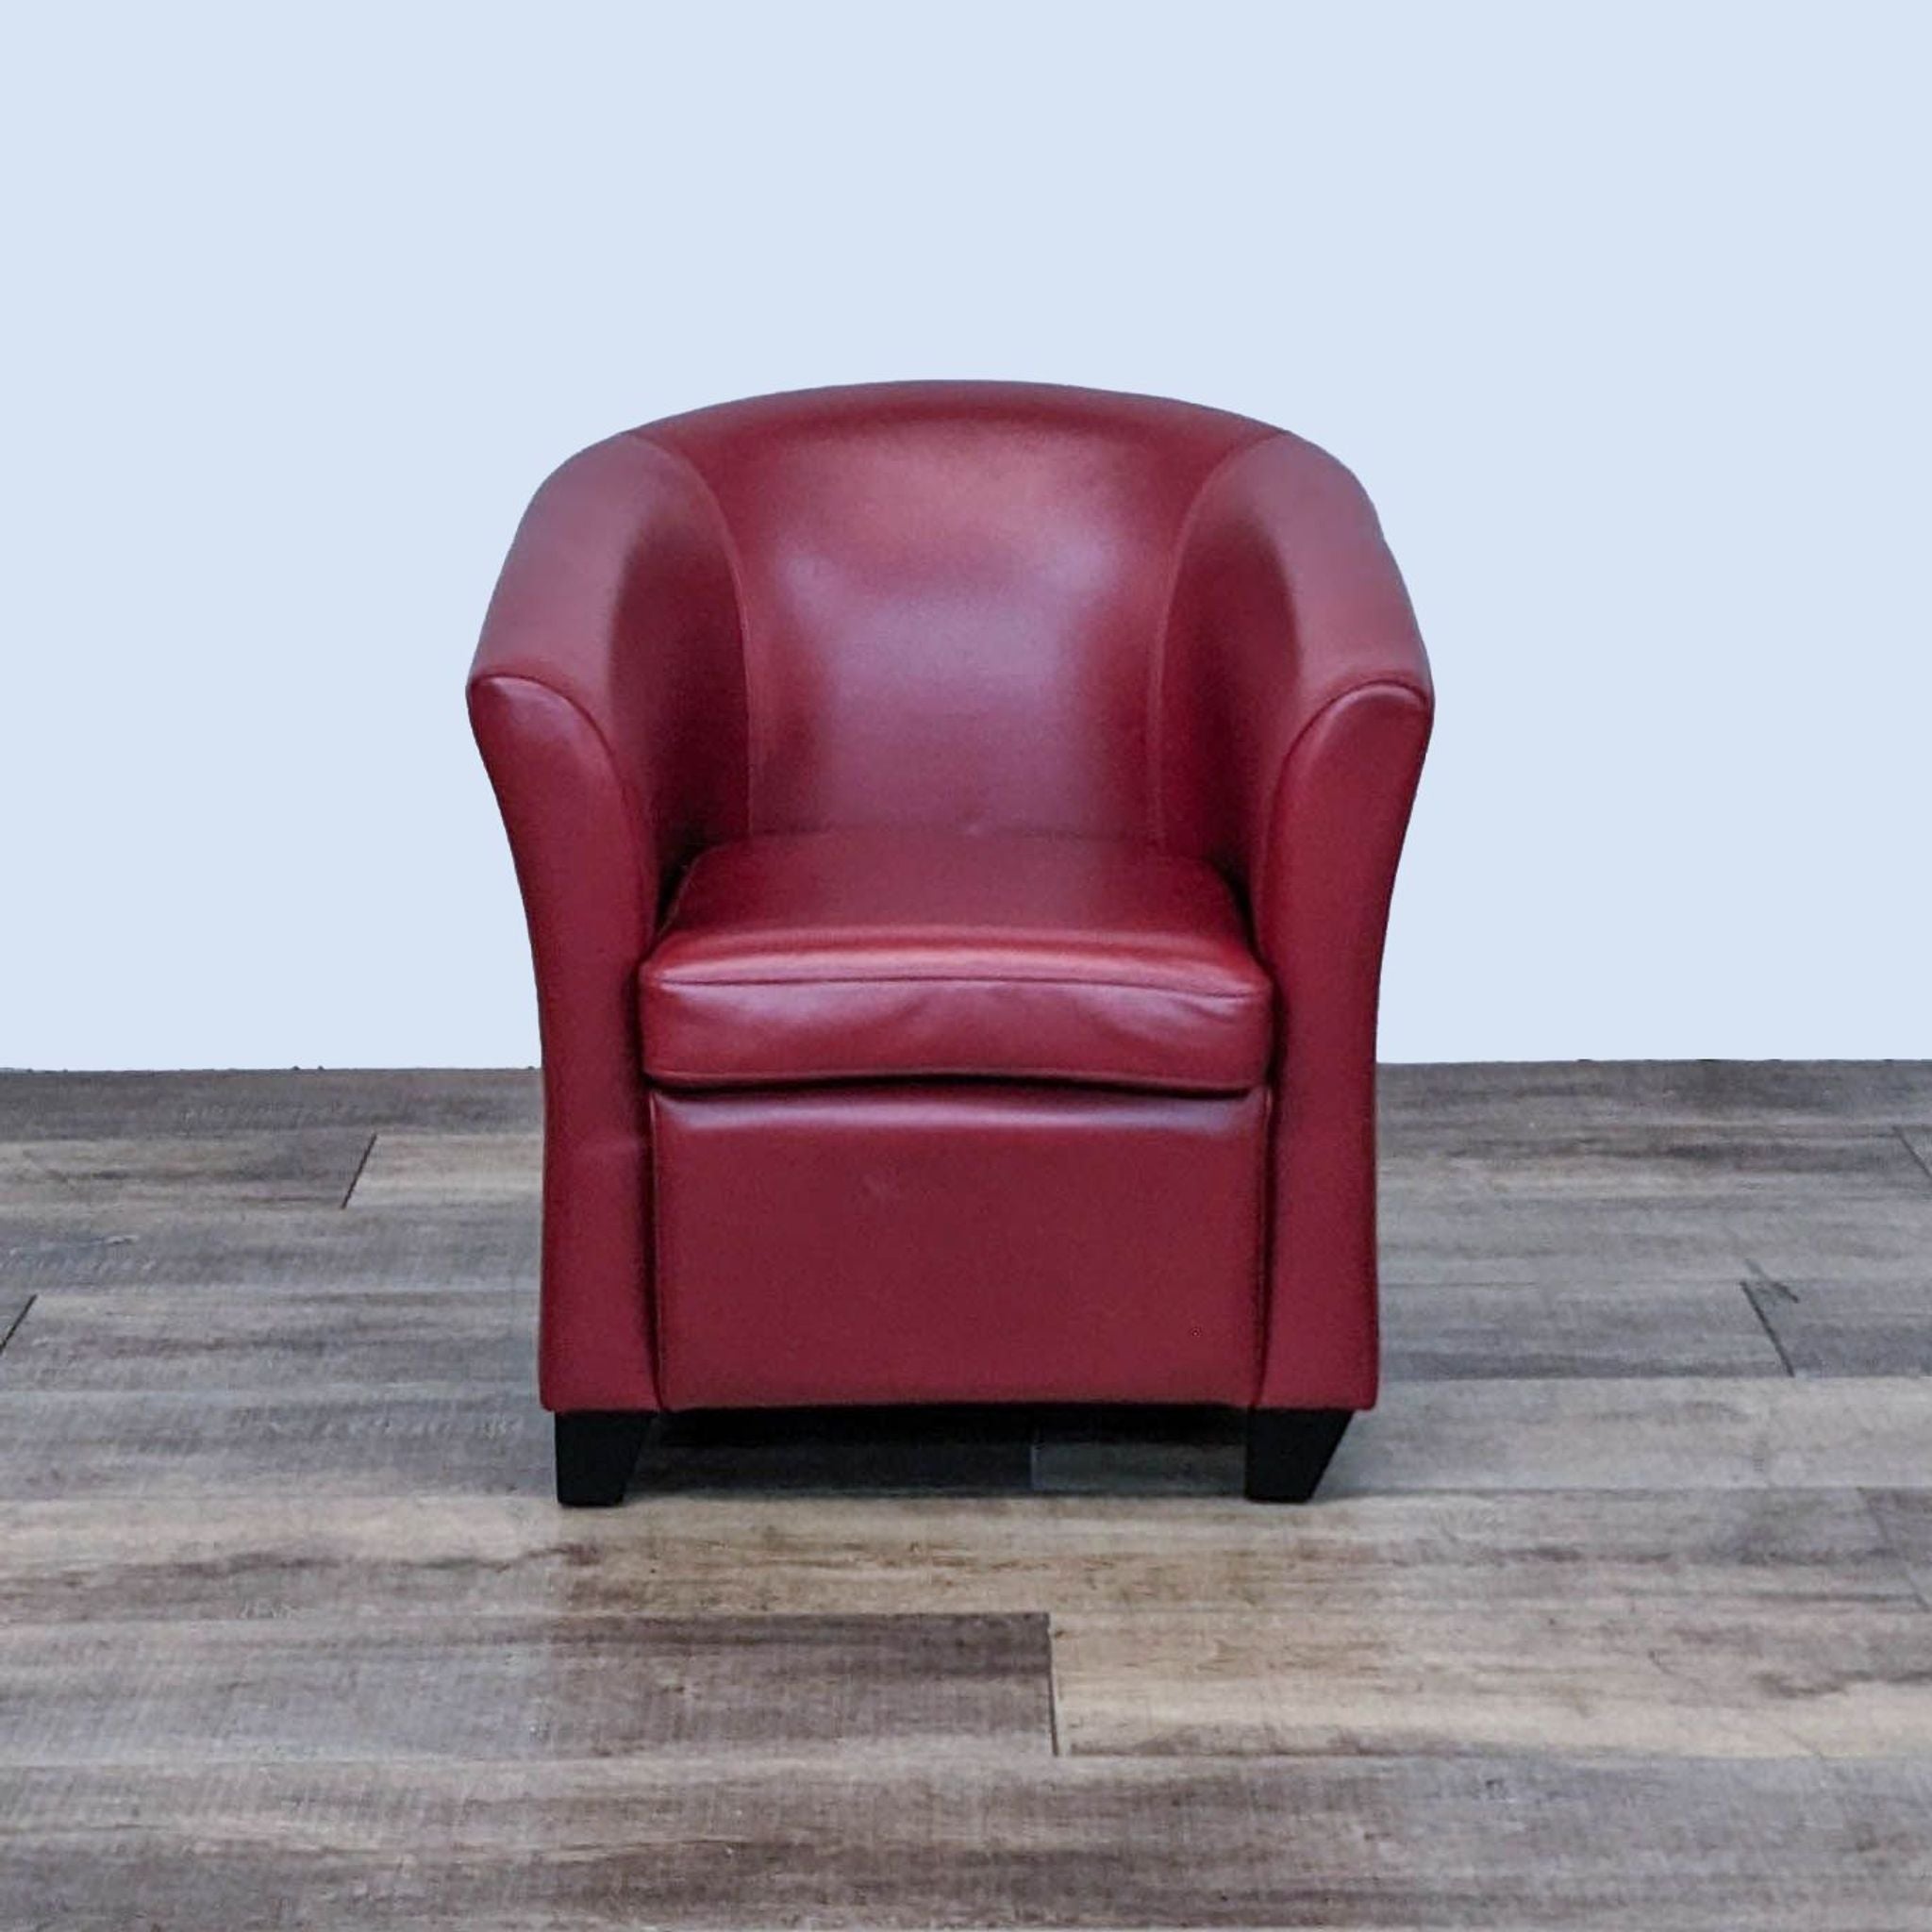 Reperch Art Deco style red leather tub chair, front view, with tapered wooden feet on a wooden floor.